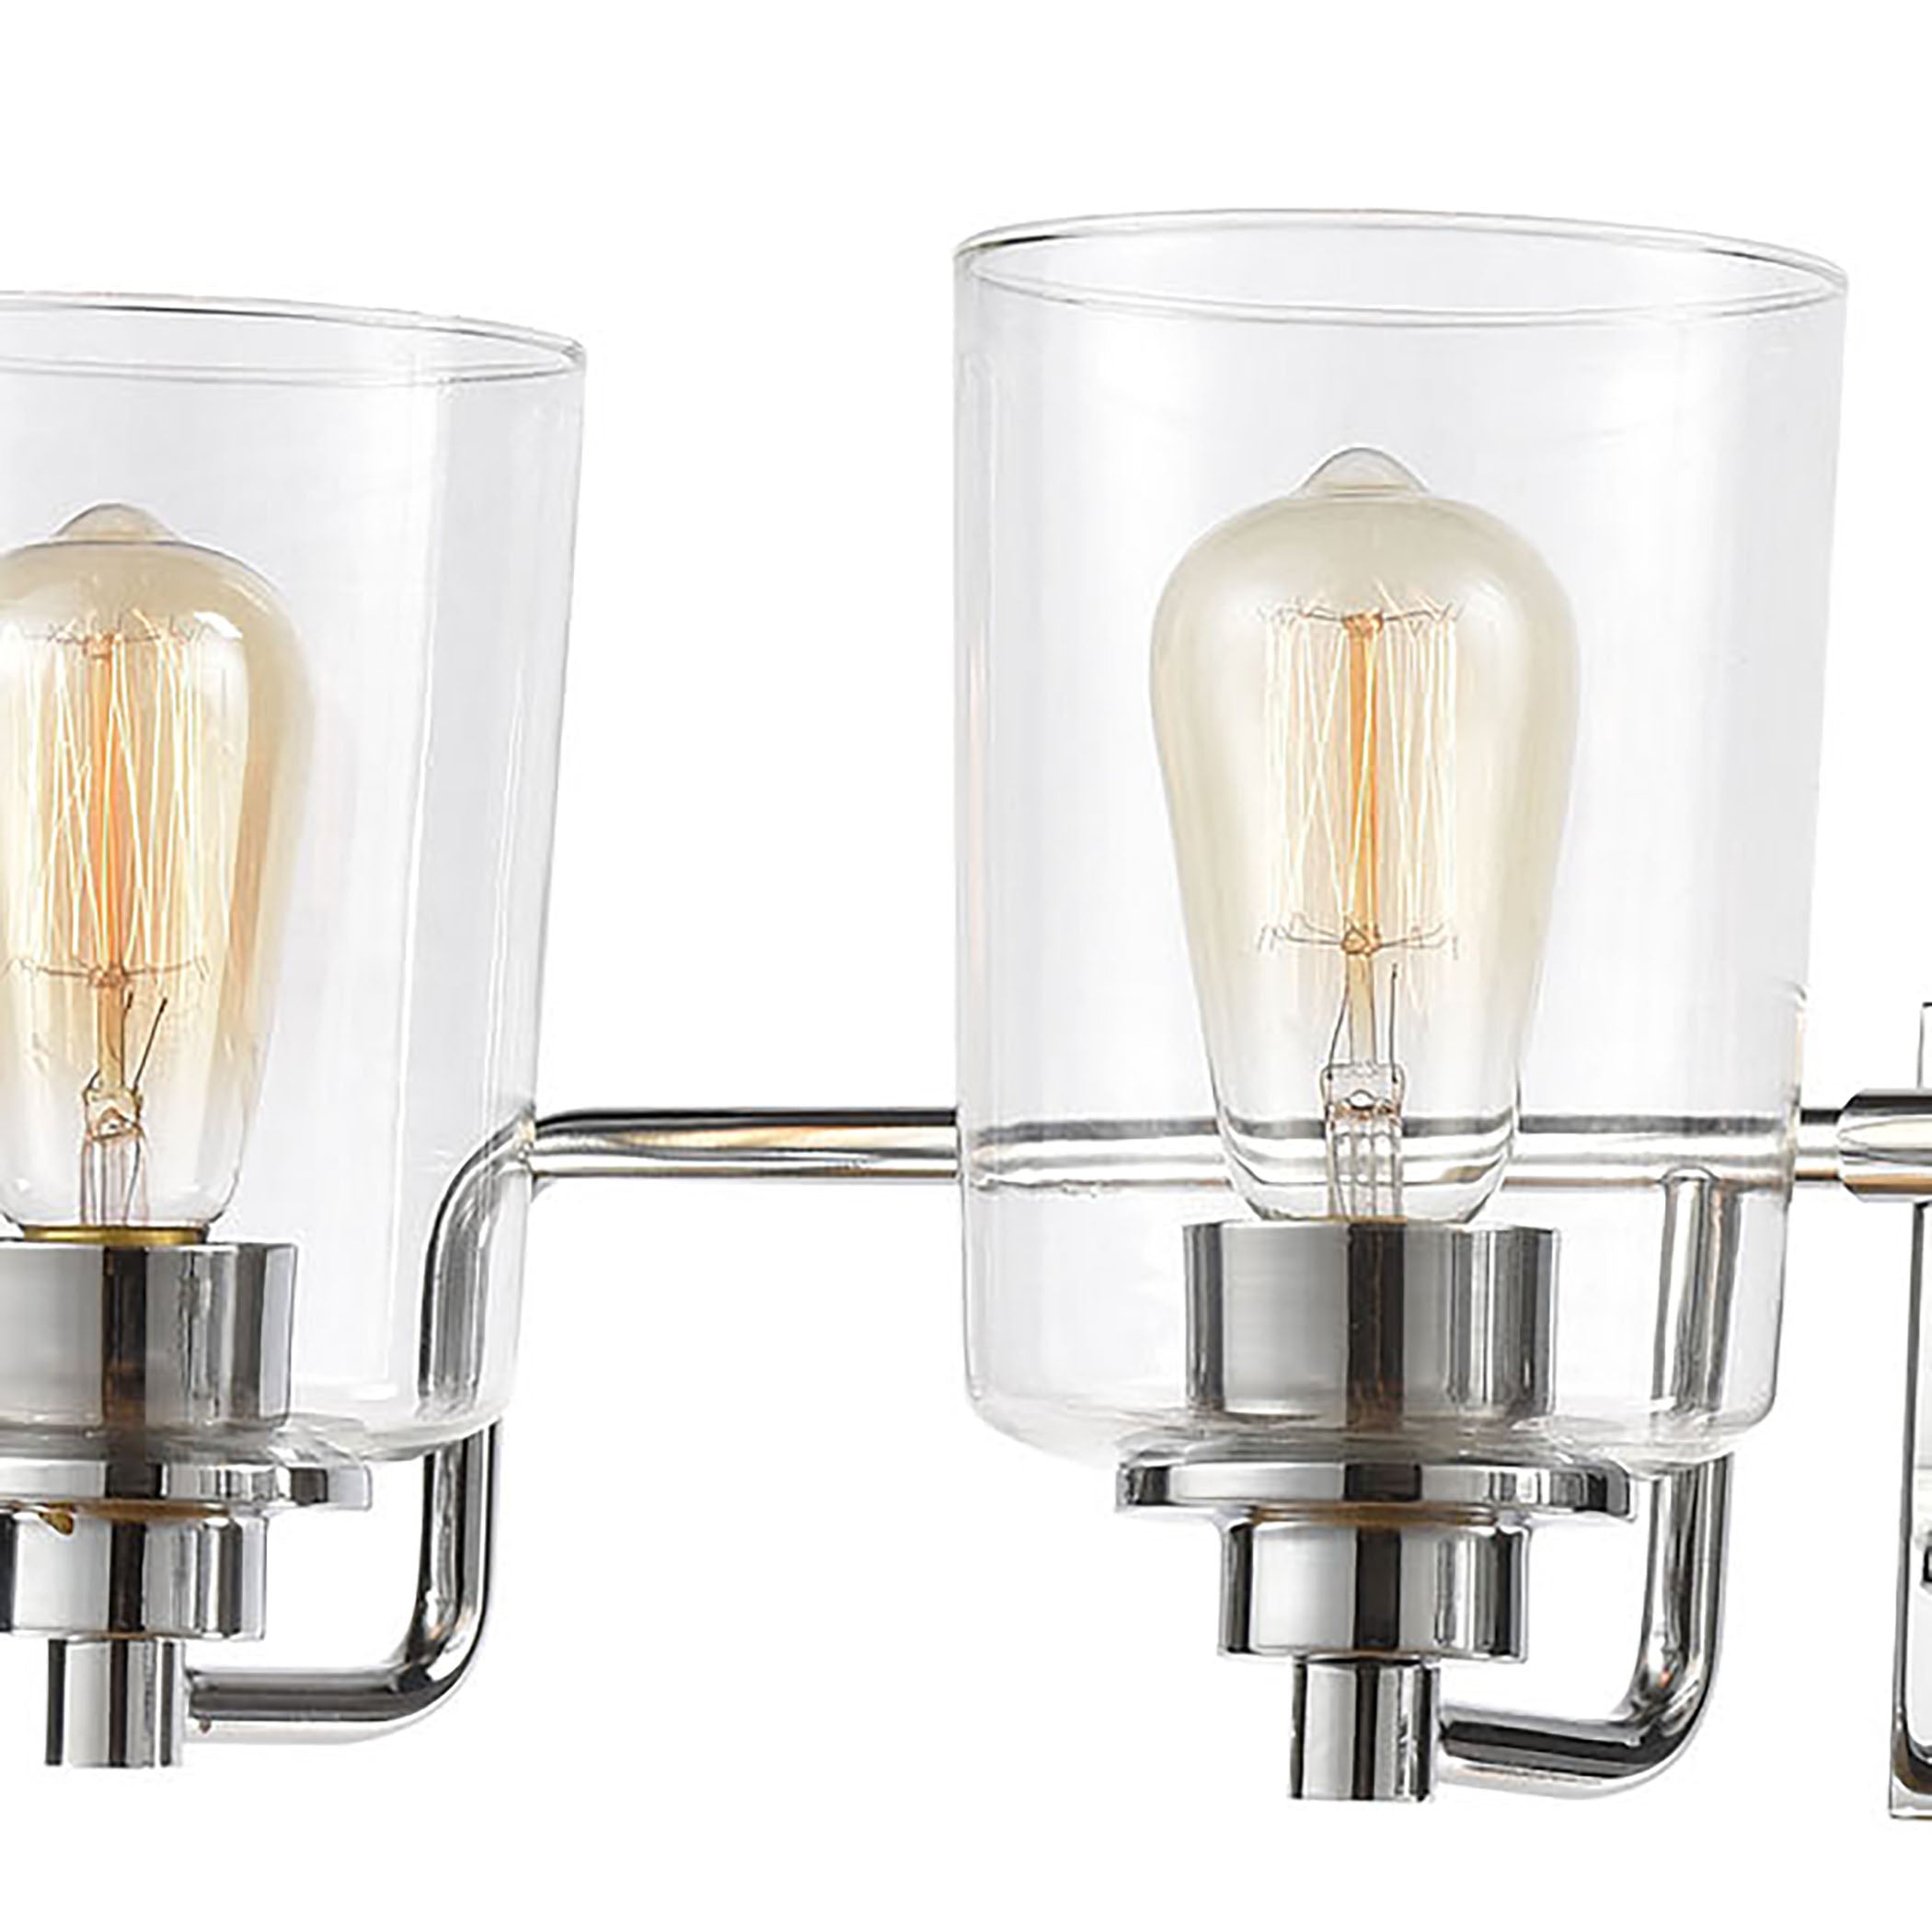 ELK Lighting 46623/4 Robins 4-Light Vanity Light in Polished Chrome with Clear Glass